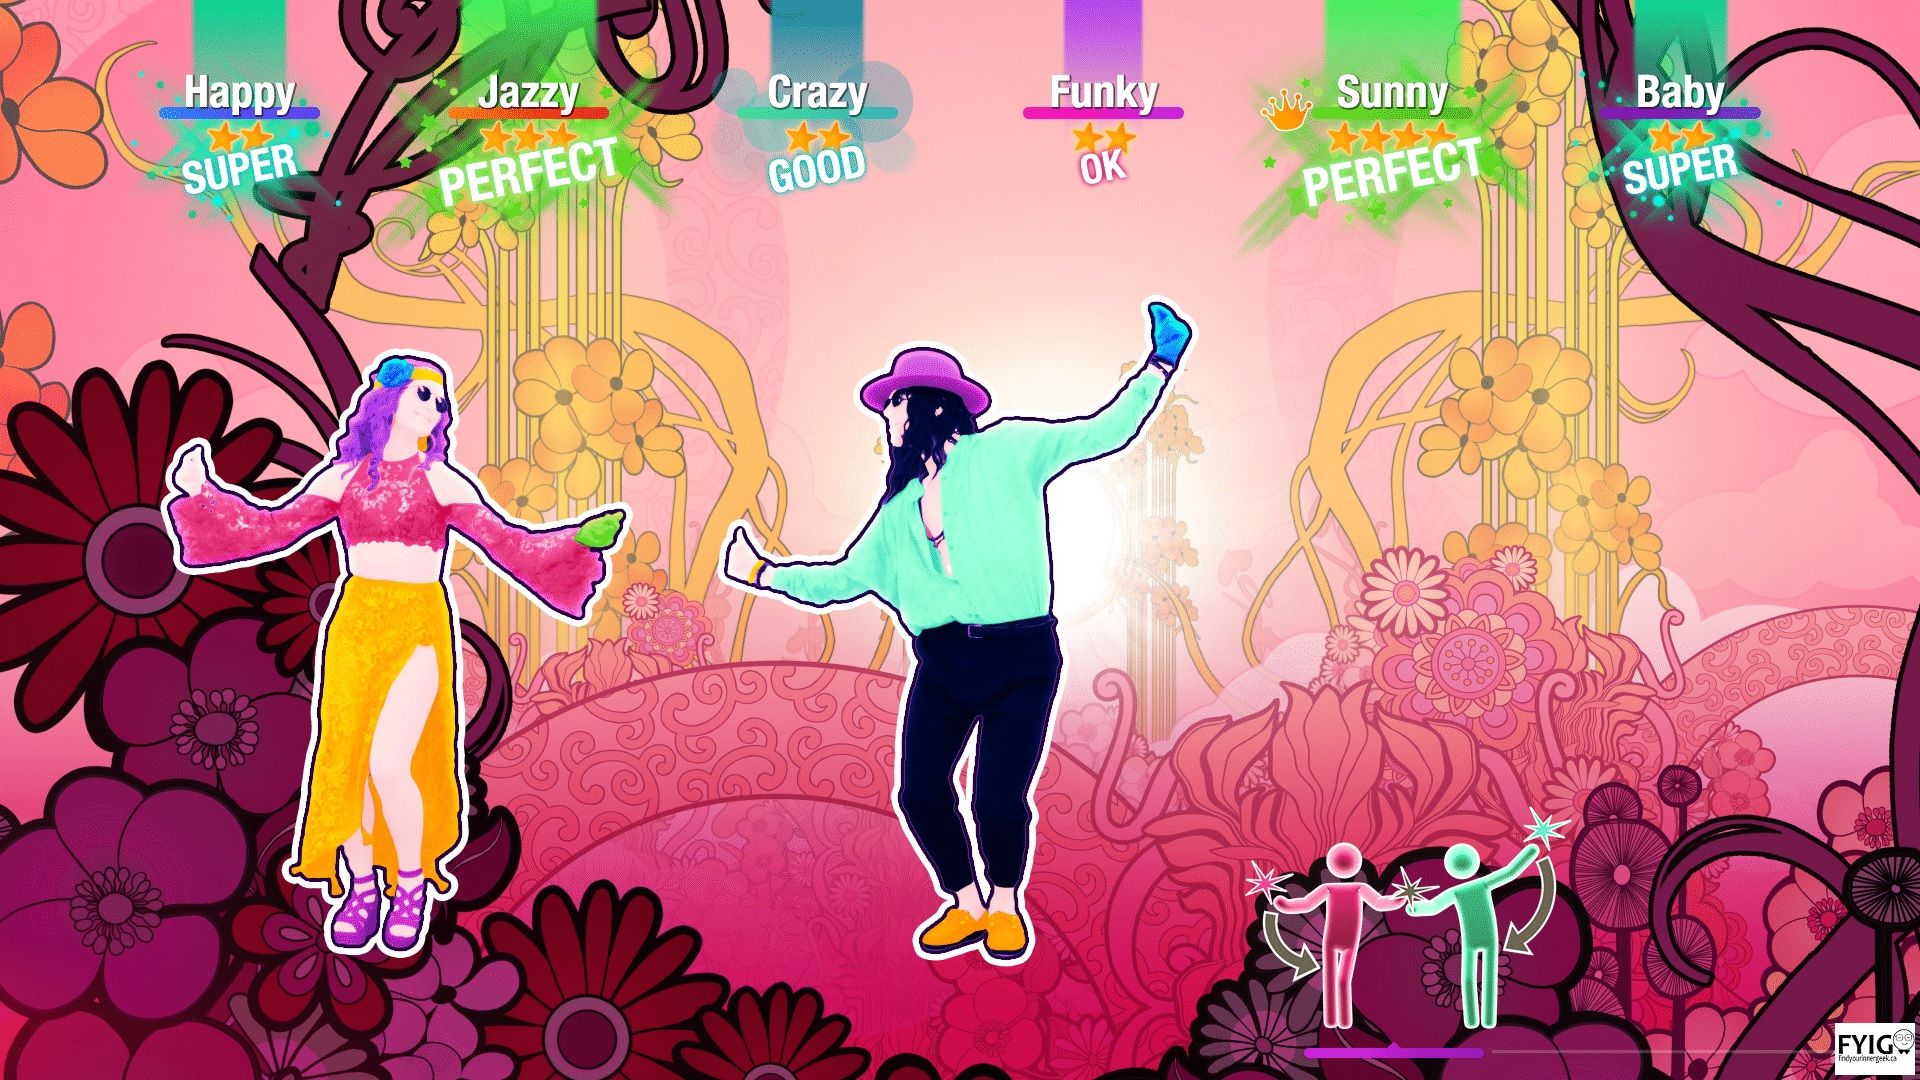 A Just Dance 2021 screenshot from the NIntendo Switch version of the game.